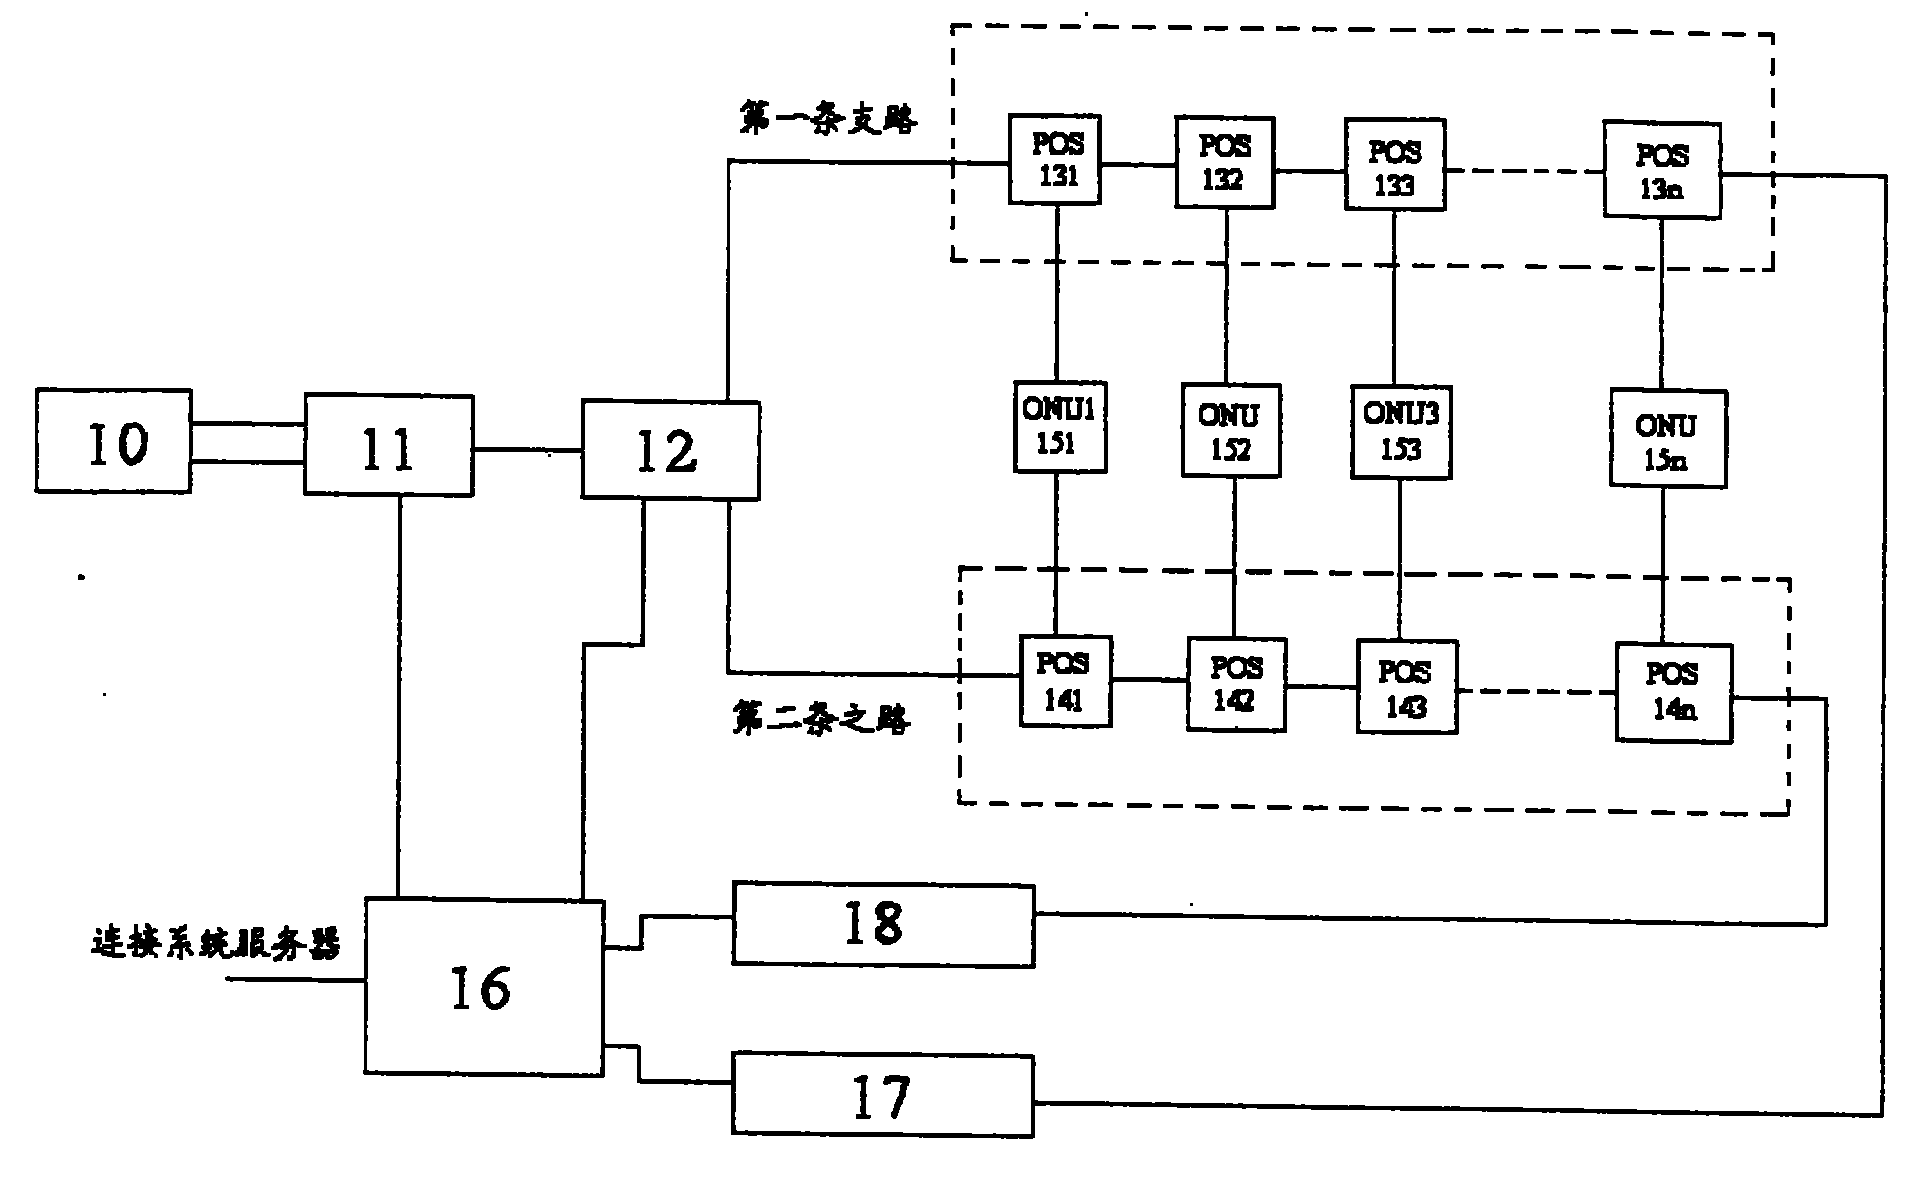 Ethern passive light network redundancy protection system using optical power detection and its implementing method